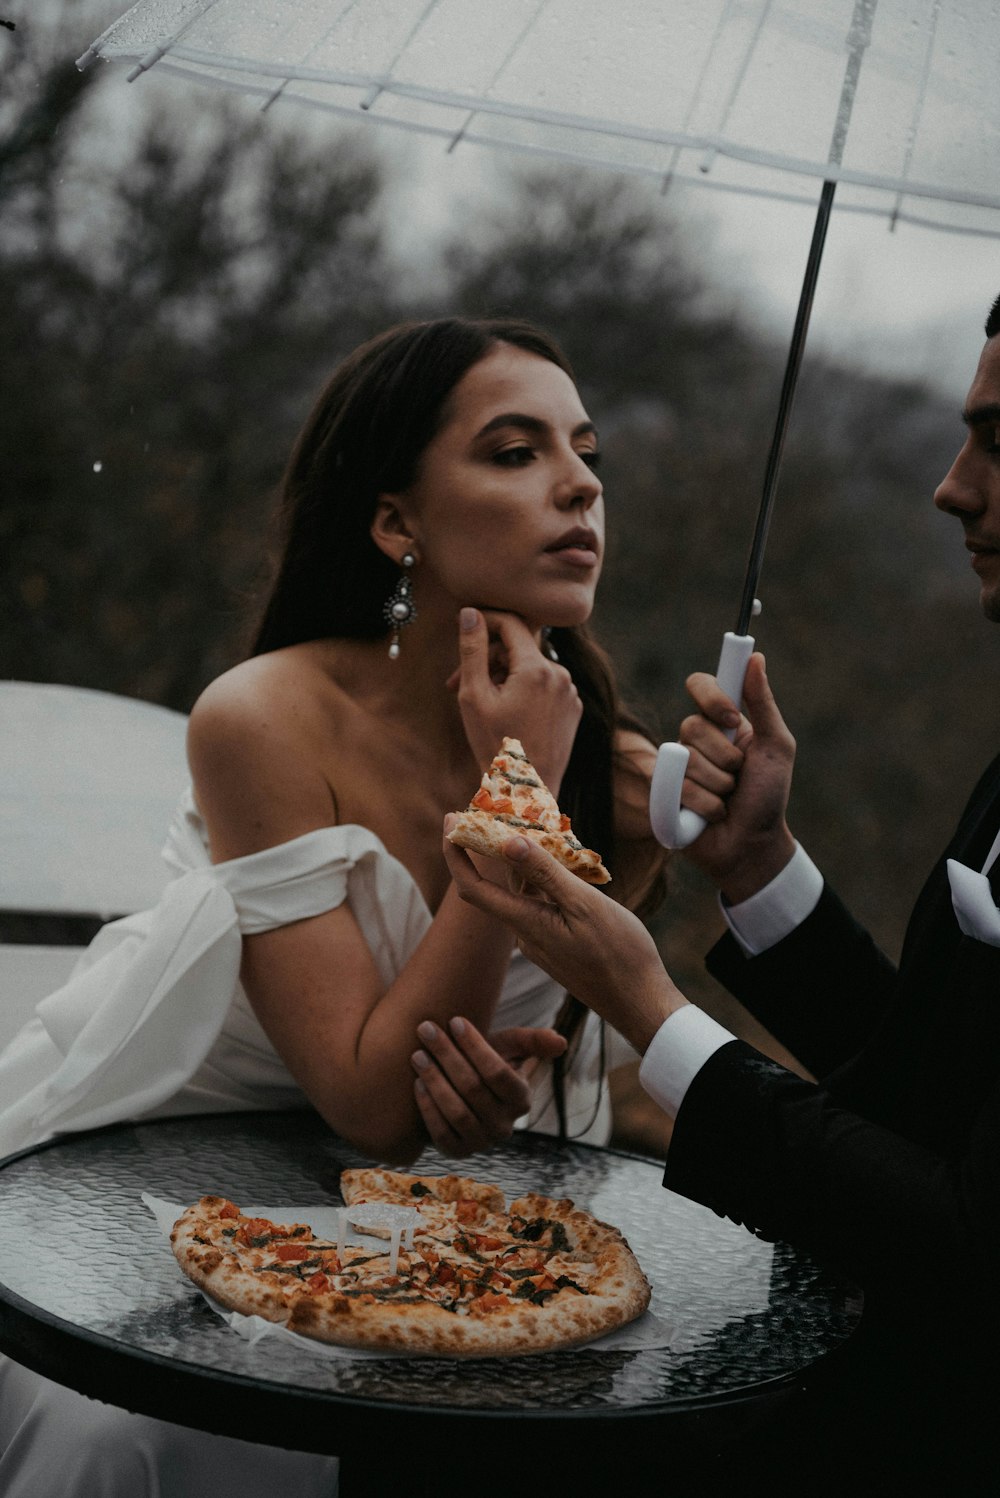 a man and a woman sitting at a table eating pizza